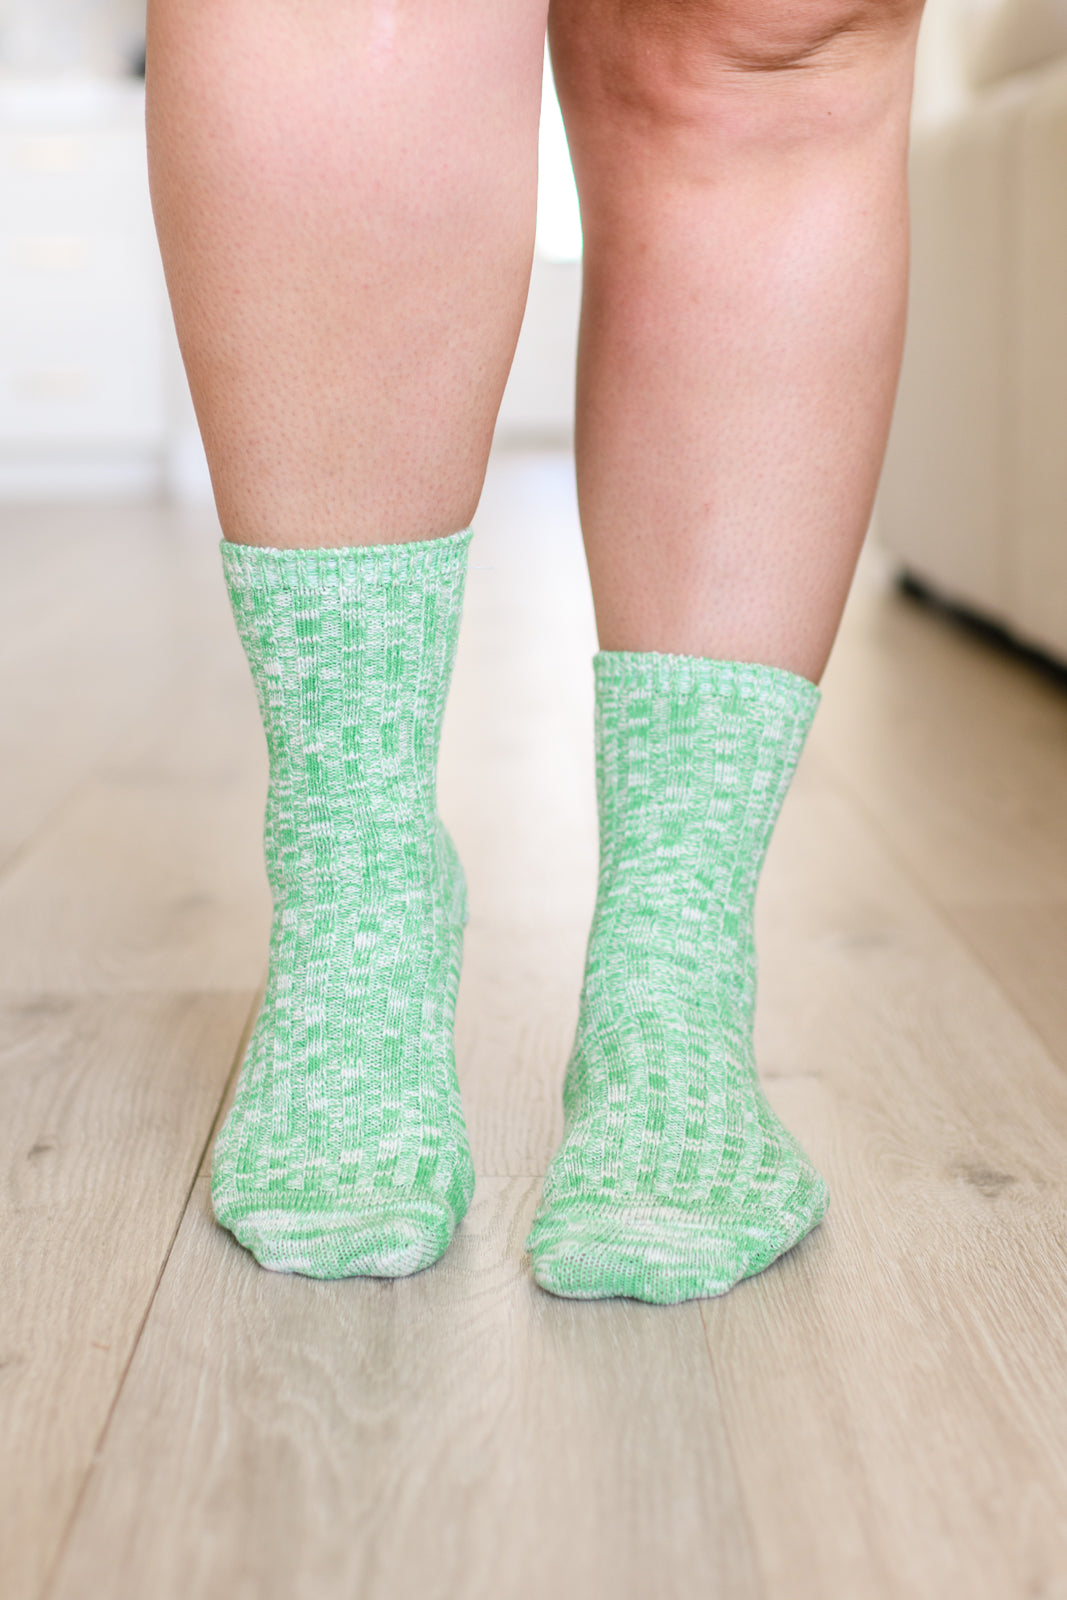 Sweet Socks Heathered Scrunch Socks |   |  Casual Chic Boutique